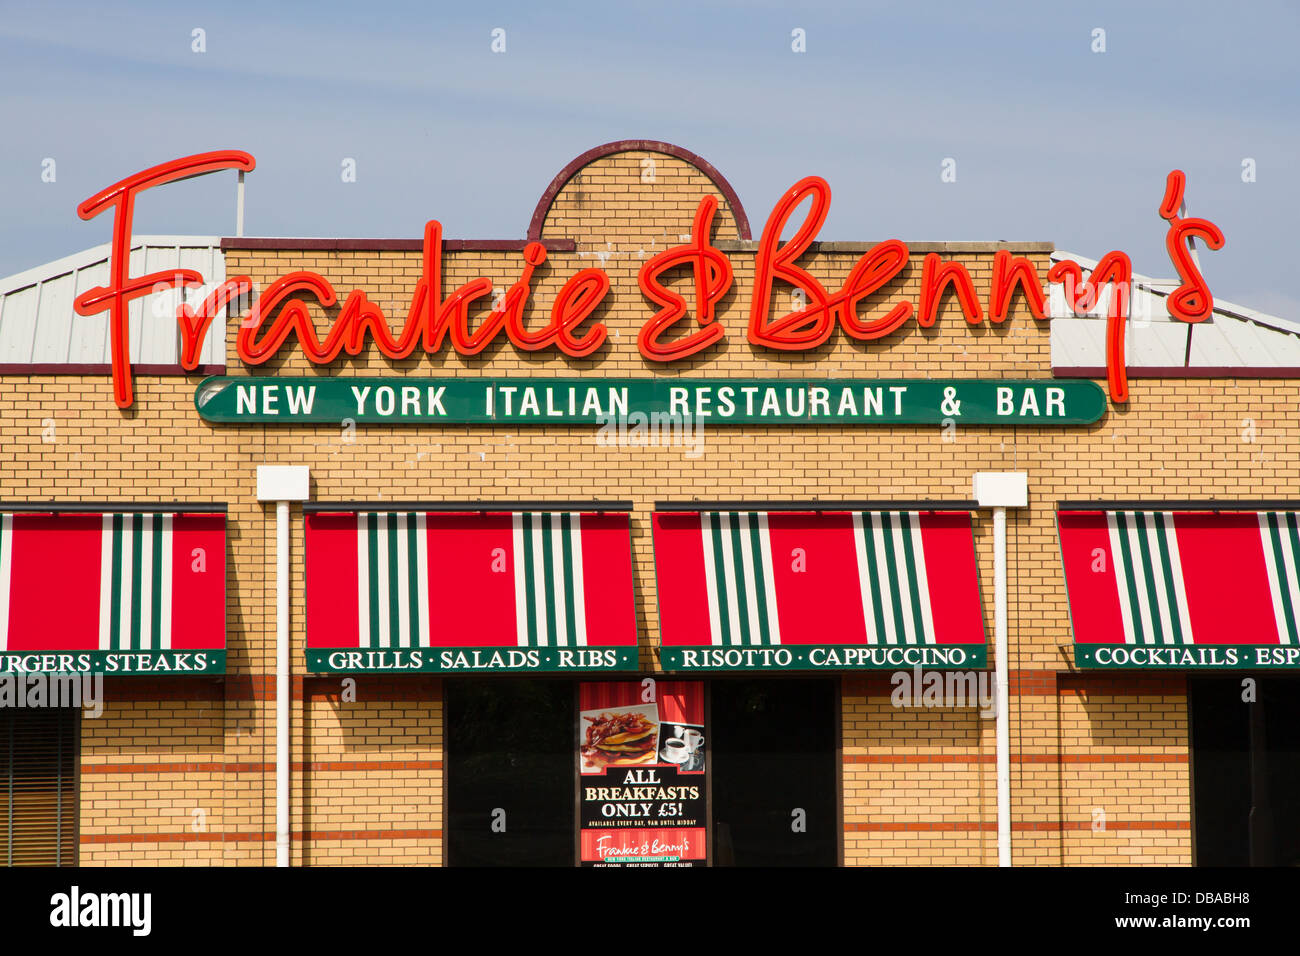 Exterior view with sign at Frankie & Bennys Italian Restaurant and Bar Stock Photo